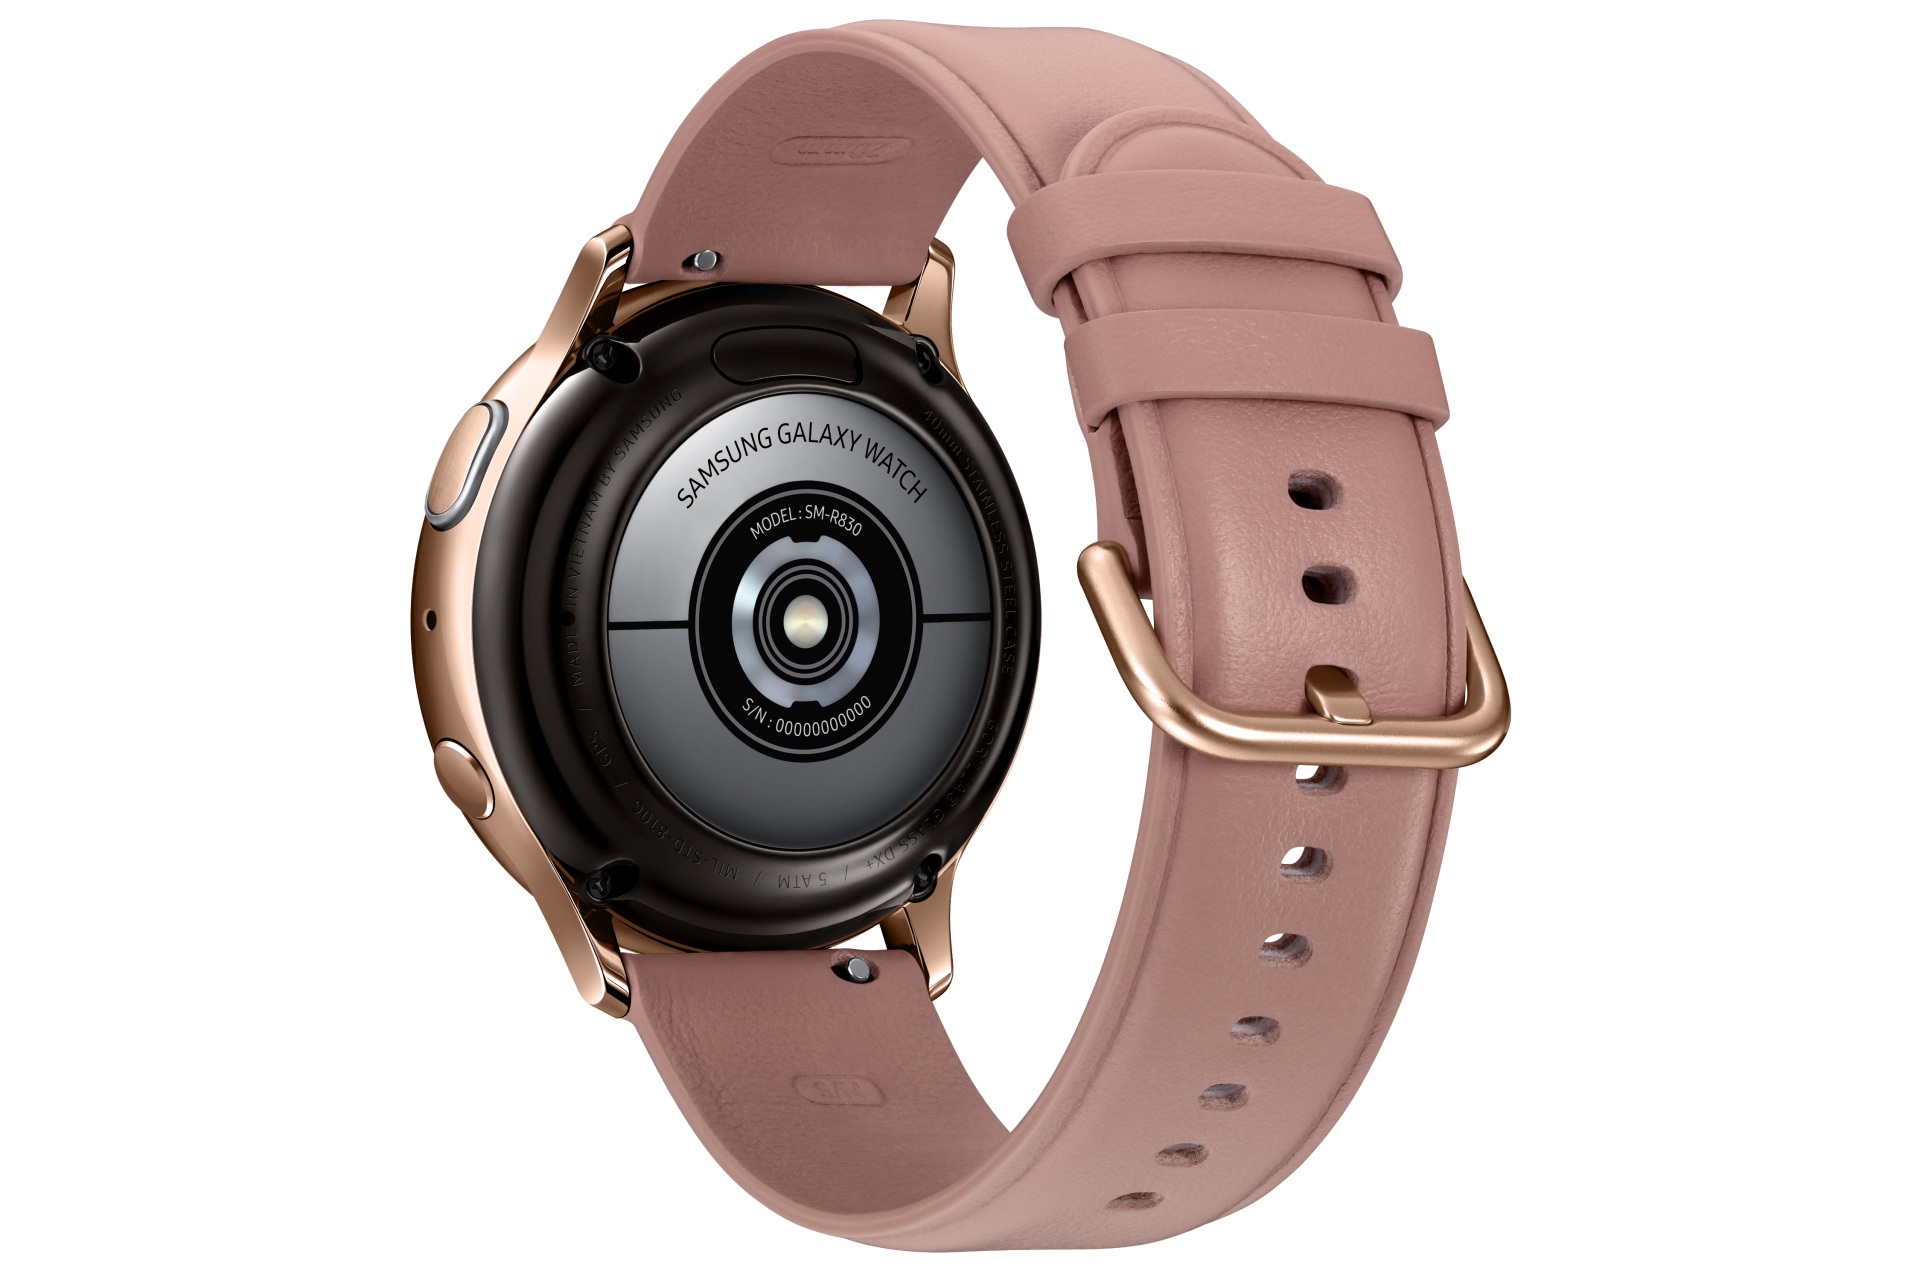 Galaxy Watch Active 2 goes official with touch bezel, new features and